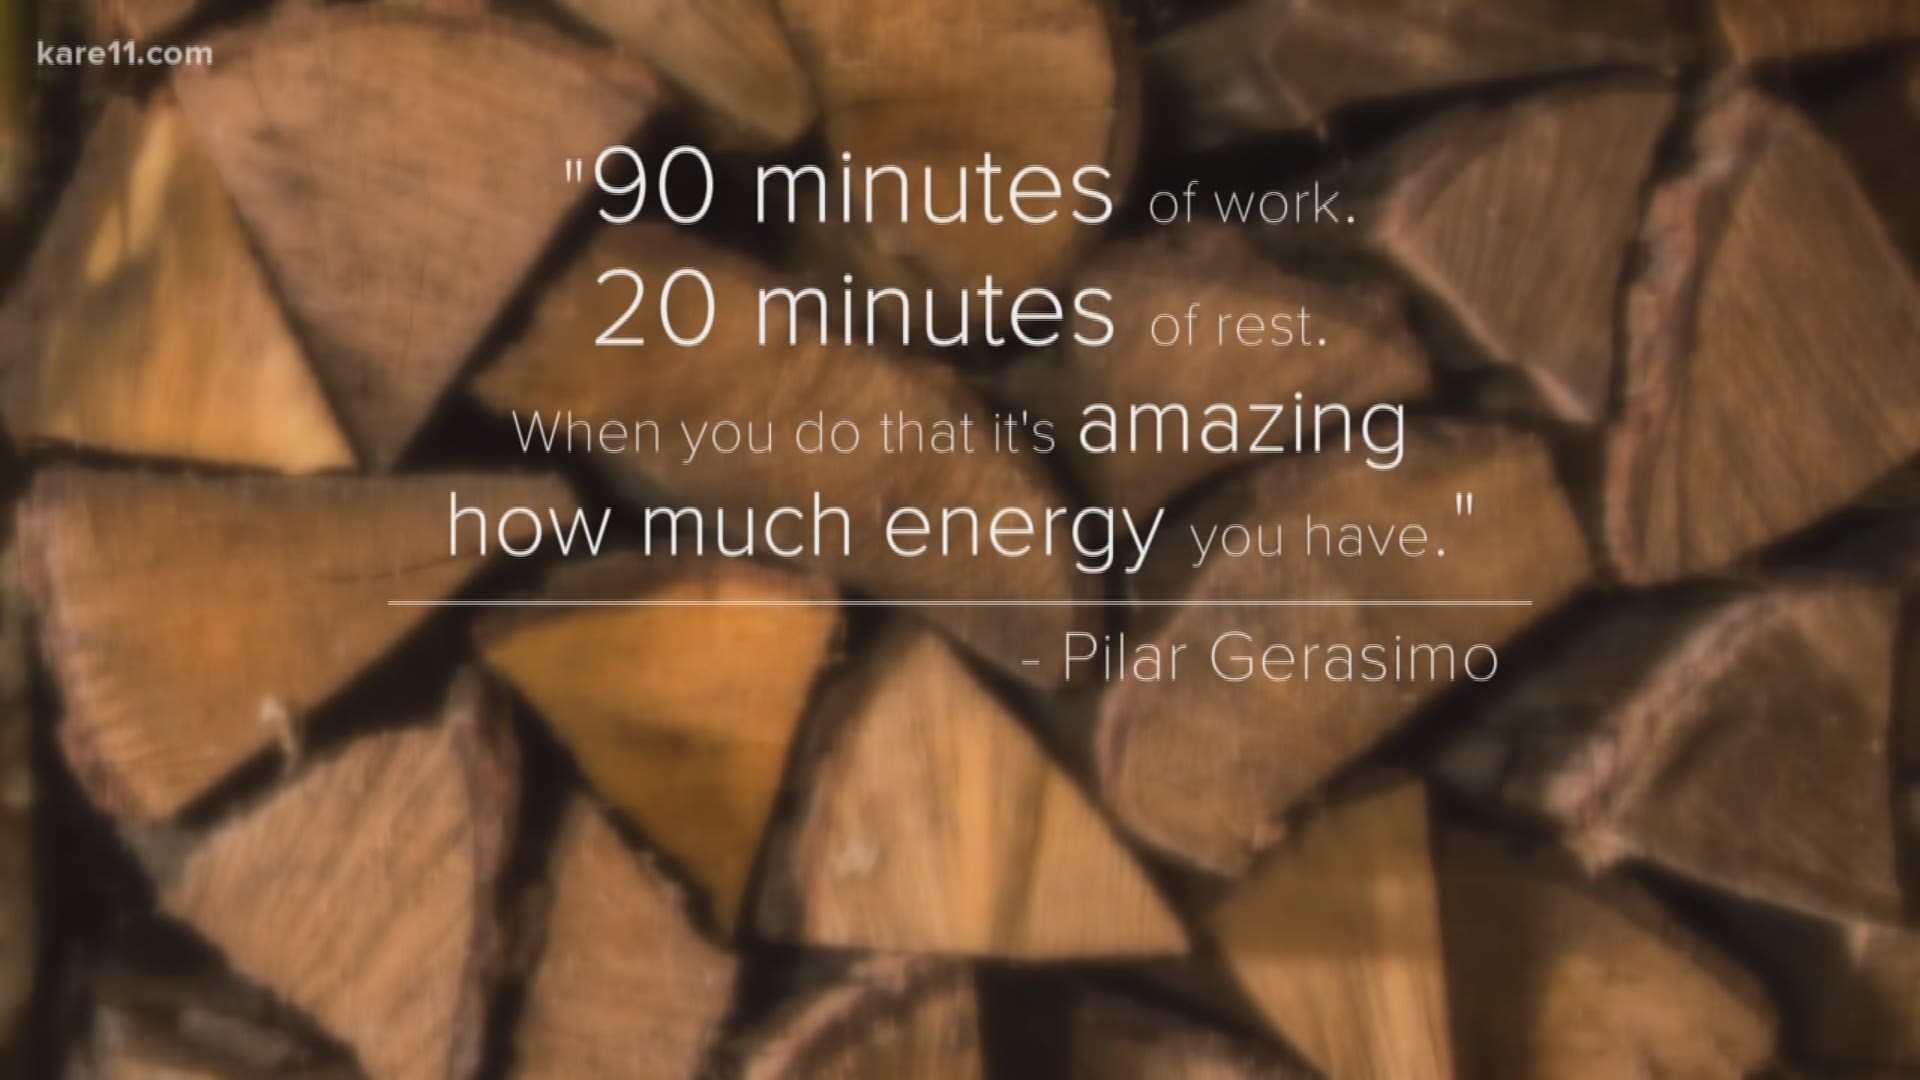 90 minutes of work and 20 minutes of rest - that's the advice from Pilar Gerasimo to keep you focused and energized all day!